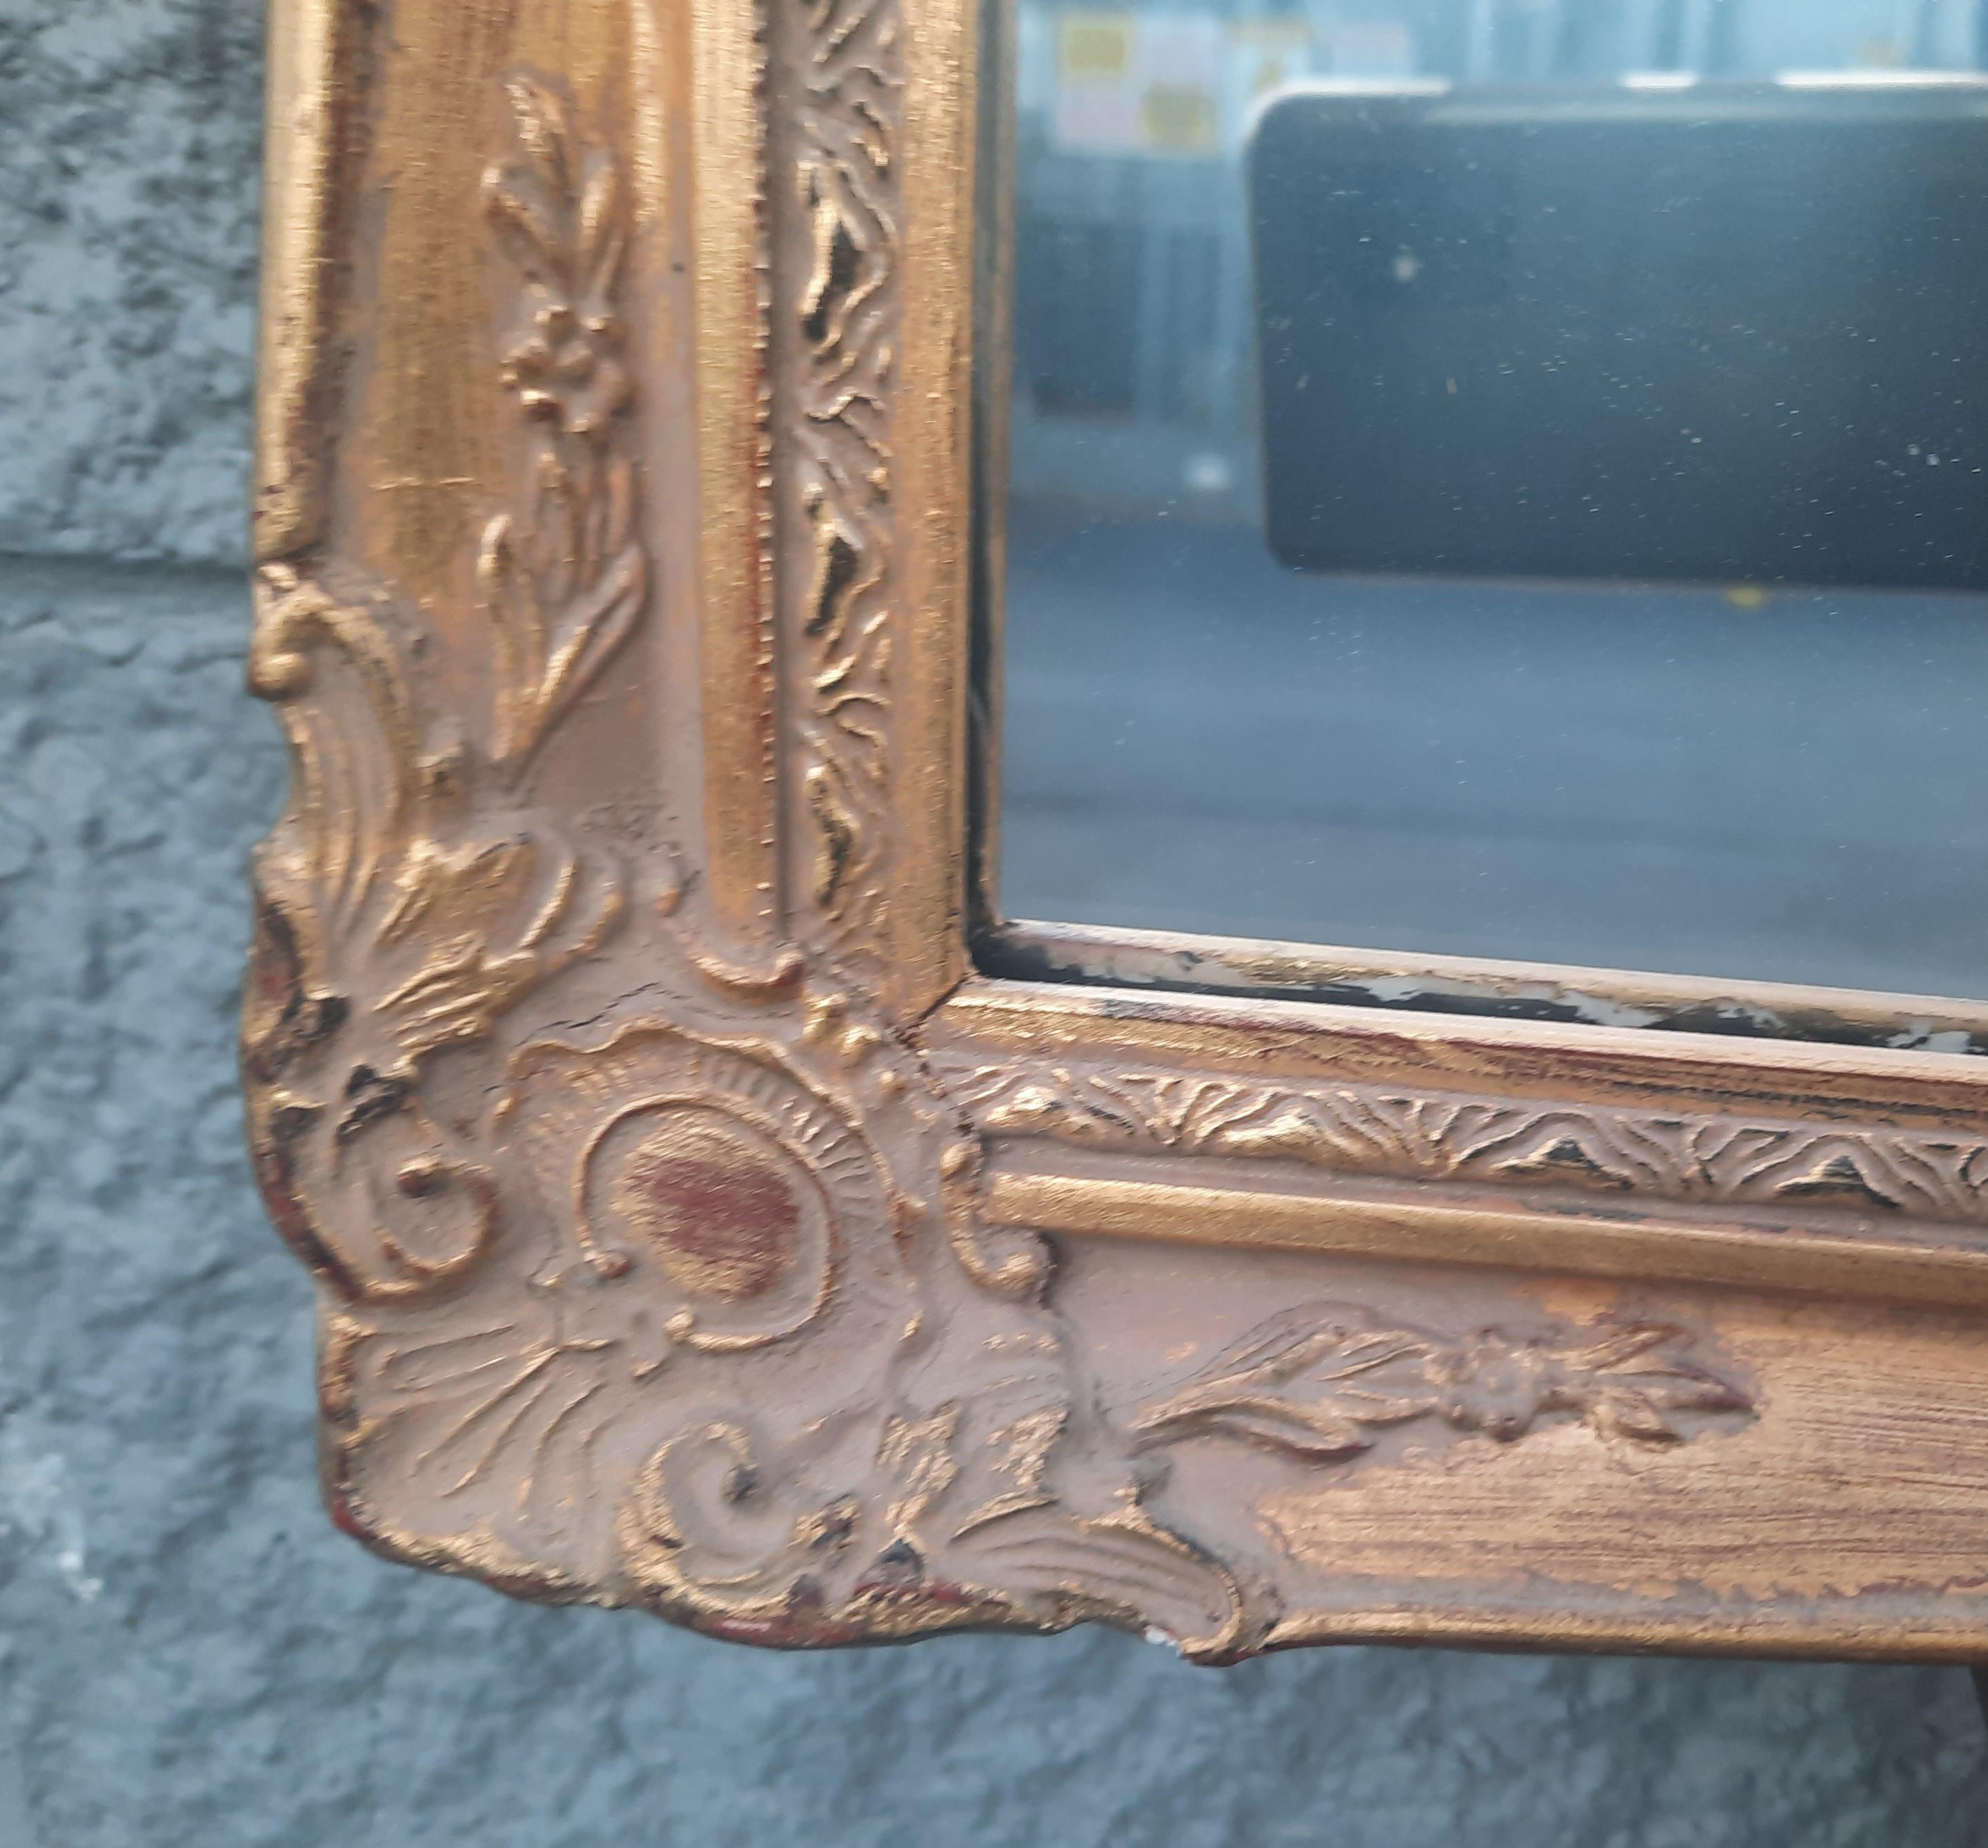 Antique giltwood carved frame French mirror.
Good vintage condition
Measures 39.5